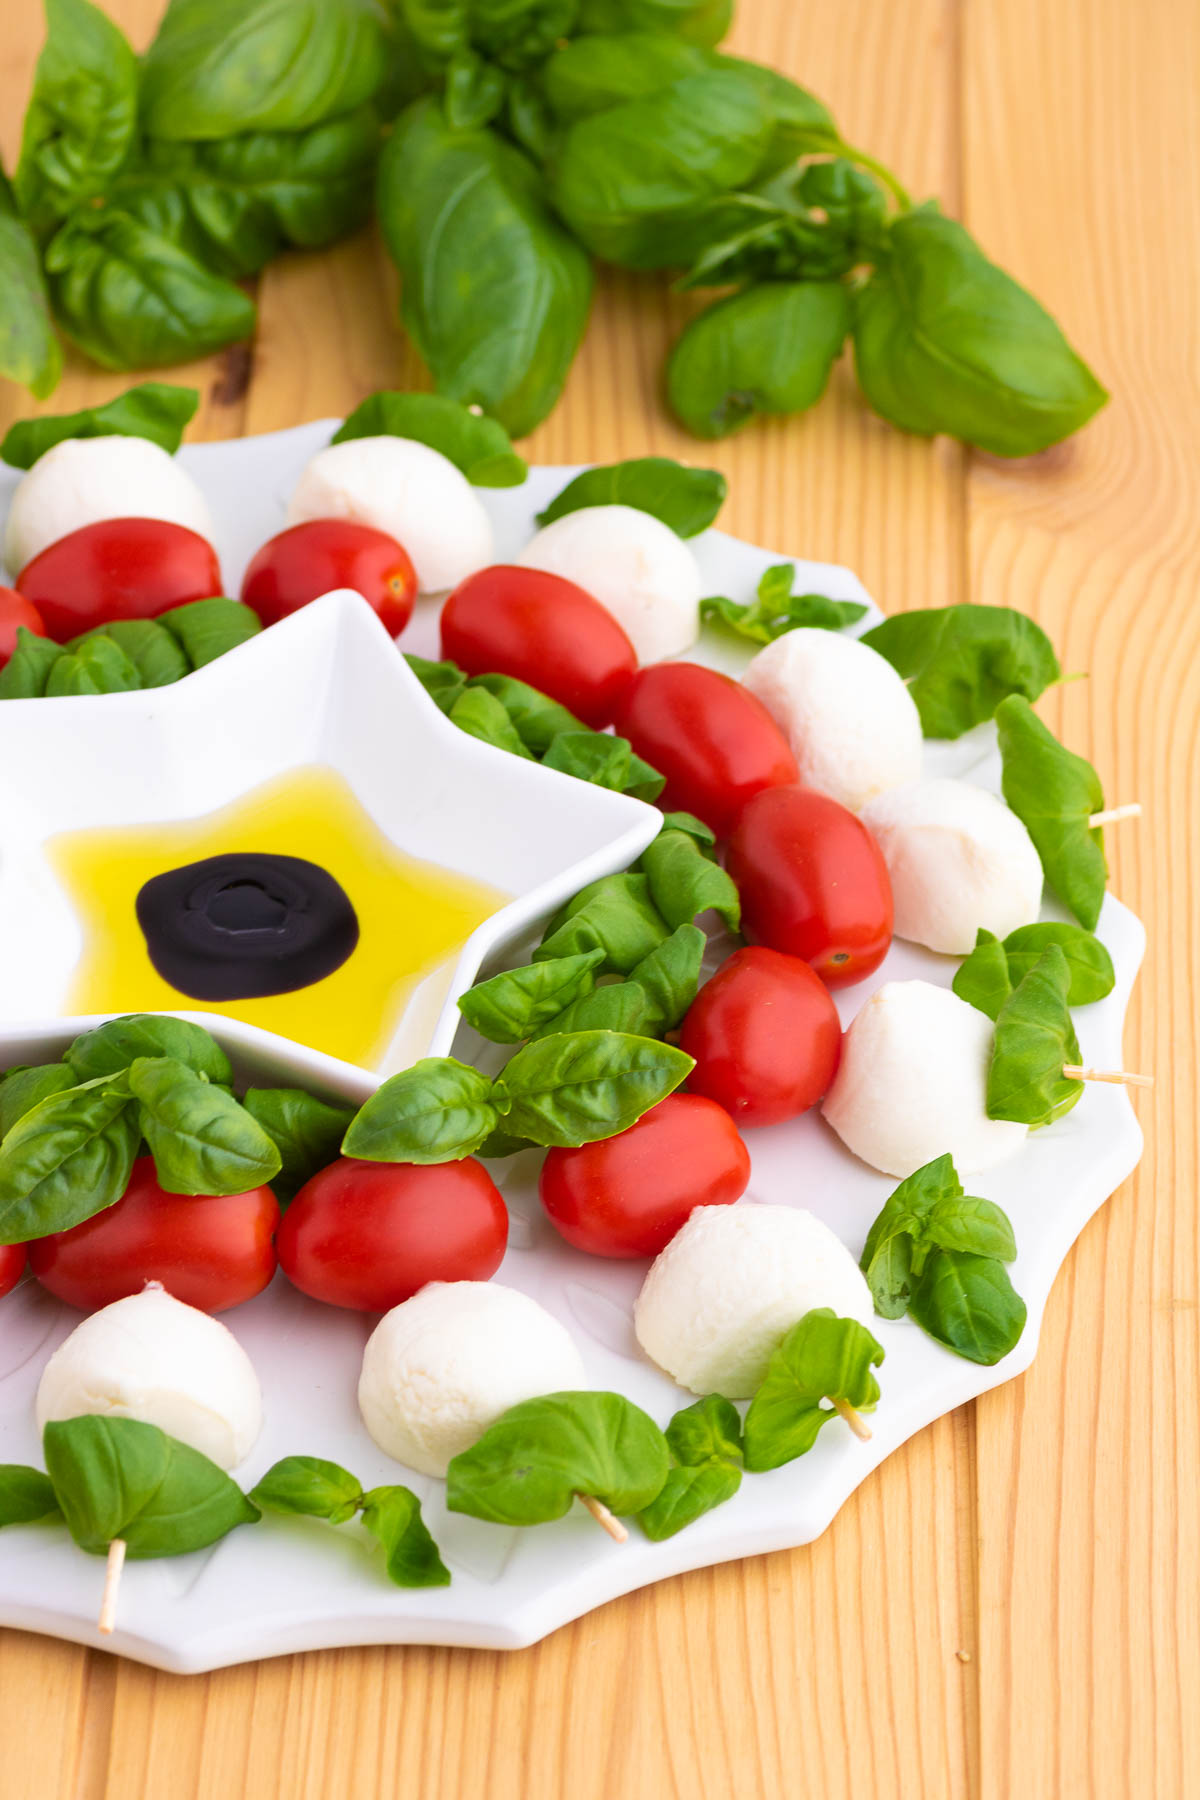 Fresh basil, bocconcini ball, and cherry tomatoes threaded onto wooden skewers and arranged into a circular caprese appetizer wreath.